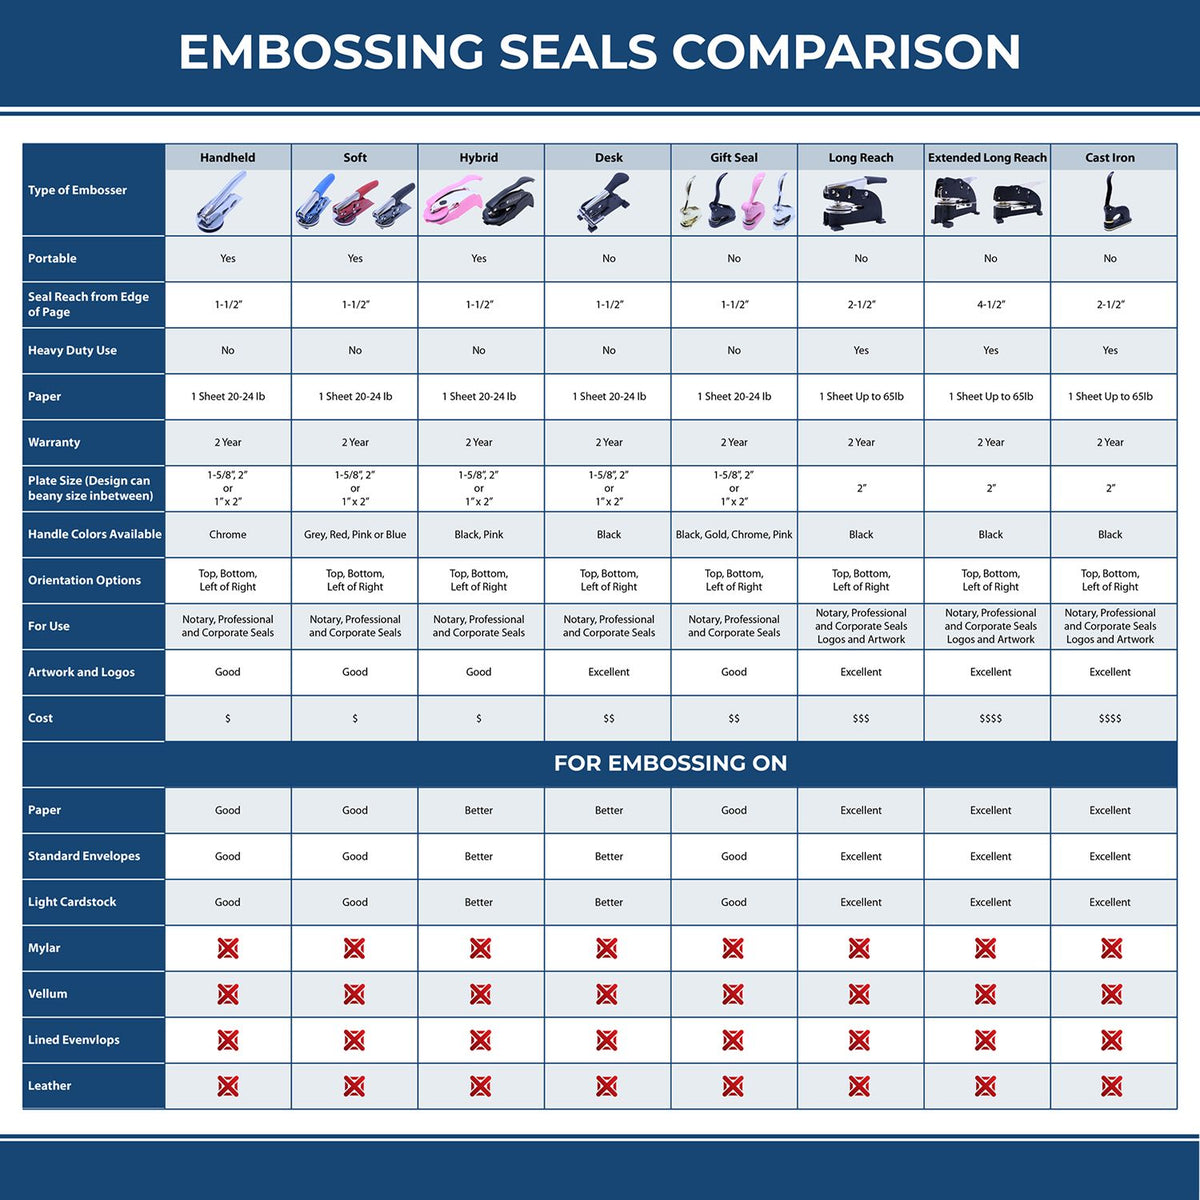 A comparison chart for the different types of mount models available for the Gift Minnesota Landscape Architect Seal